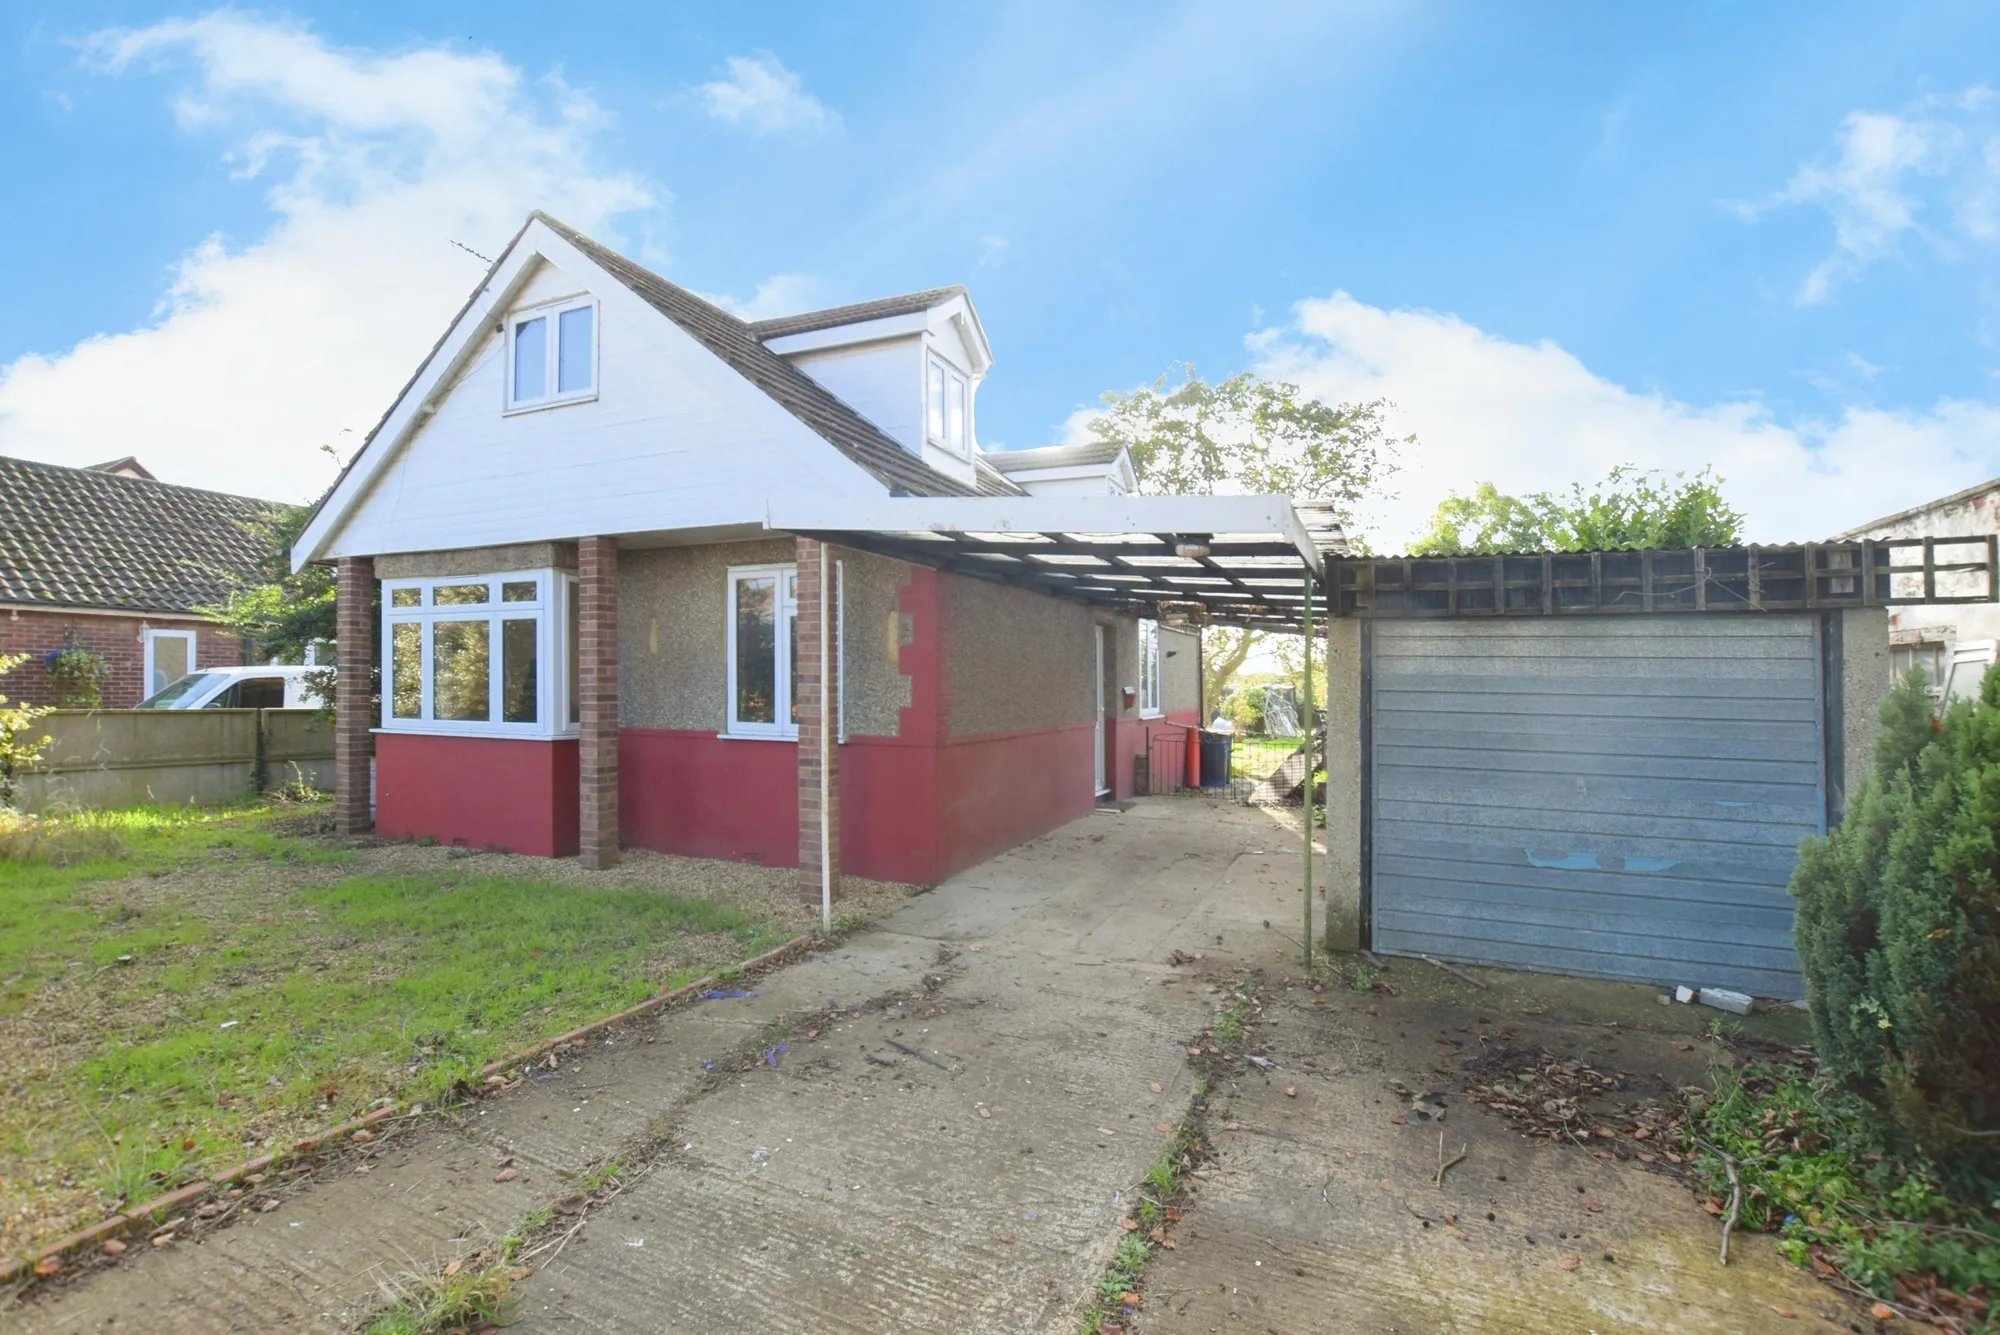 3 bed detached house for sale in Sandown Road, Grays - Property Image 1